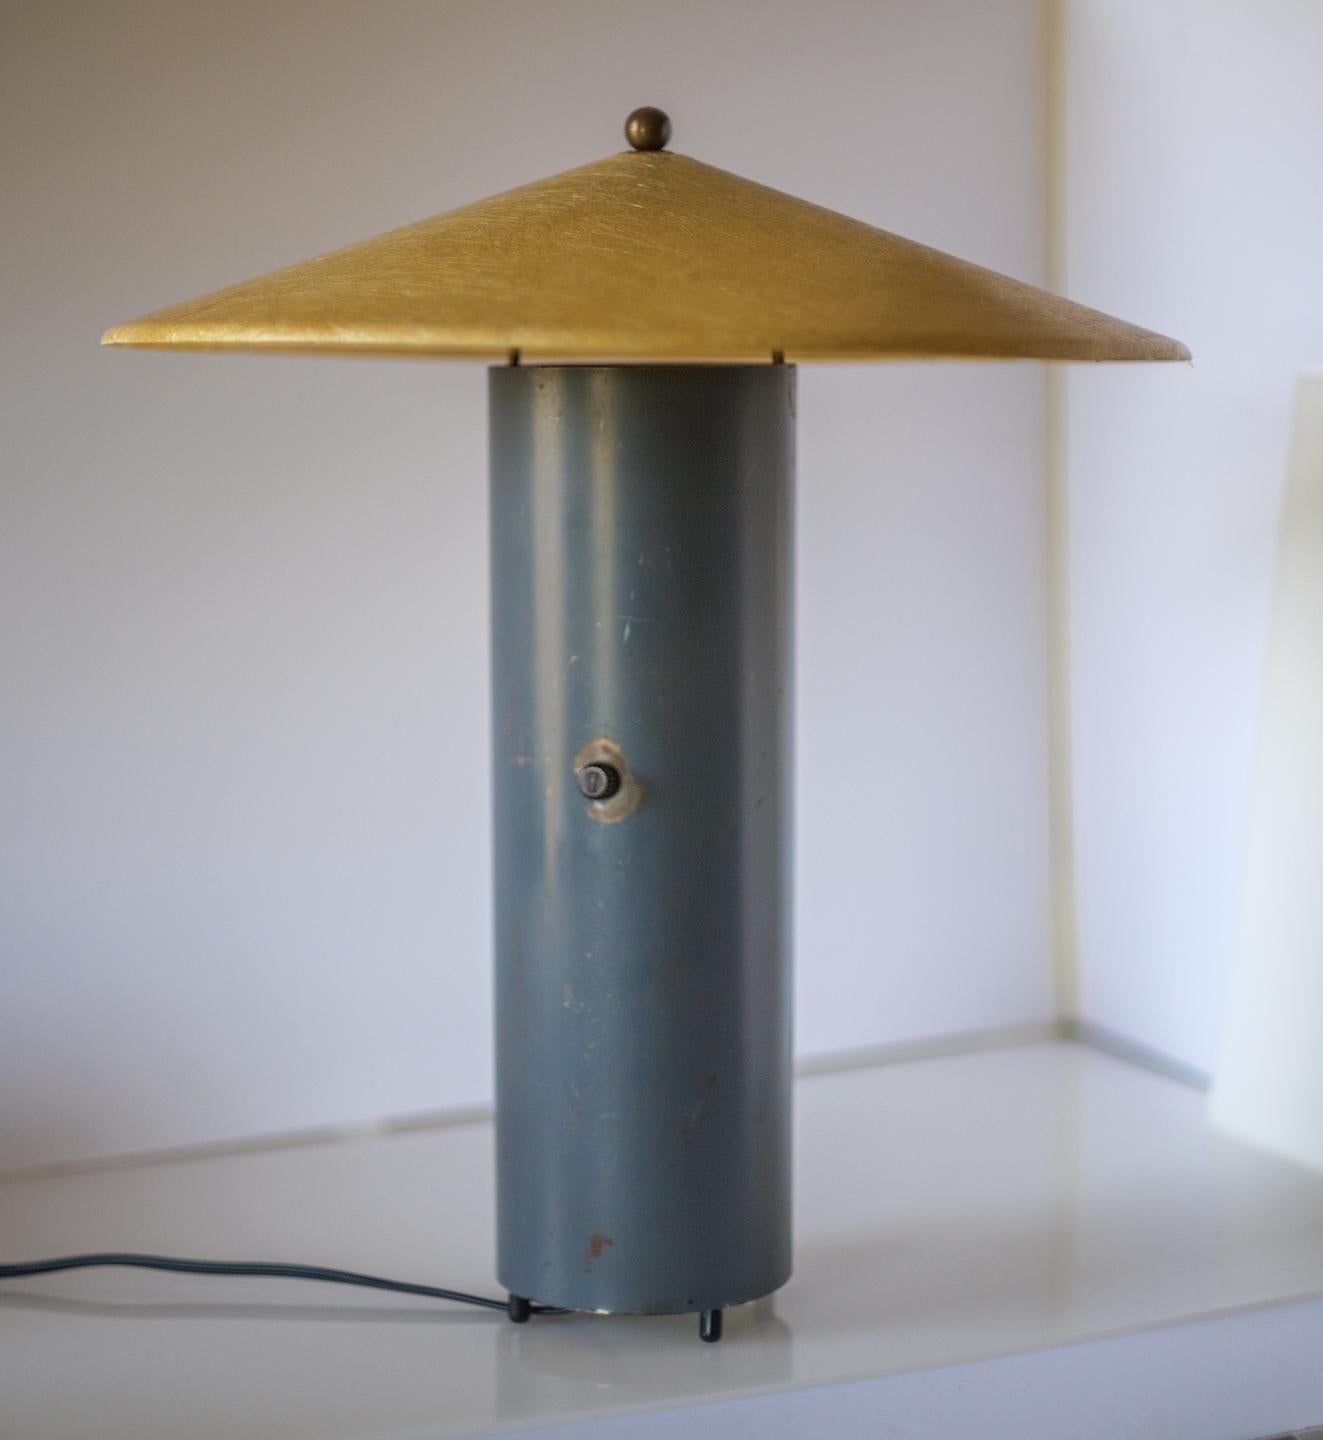 Table lamp composed of an enameled steel tube with a tiltable Fiberglas reflector shade, designed and produced by Asian/American designer and educator Bill Lam in 1952. William M.C. (Bill) Lam (1924-2012), a pioneer in architectural lighting, was